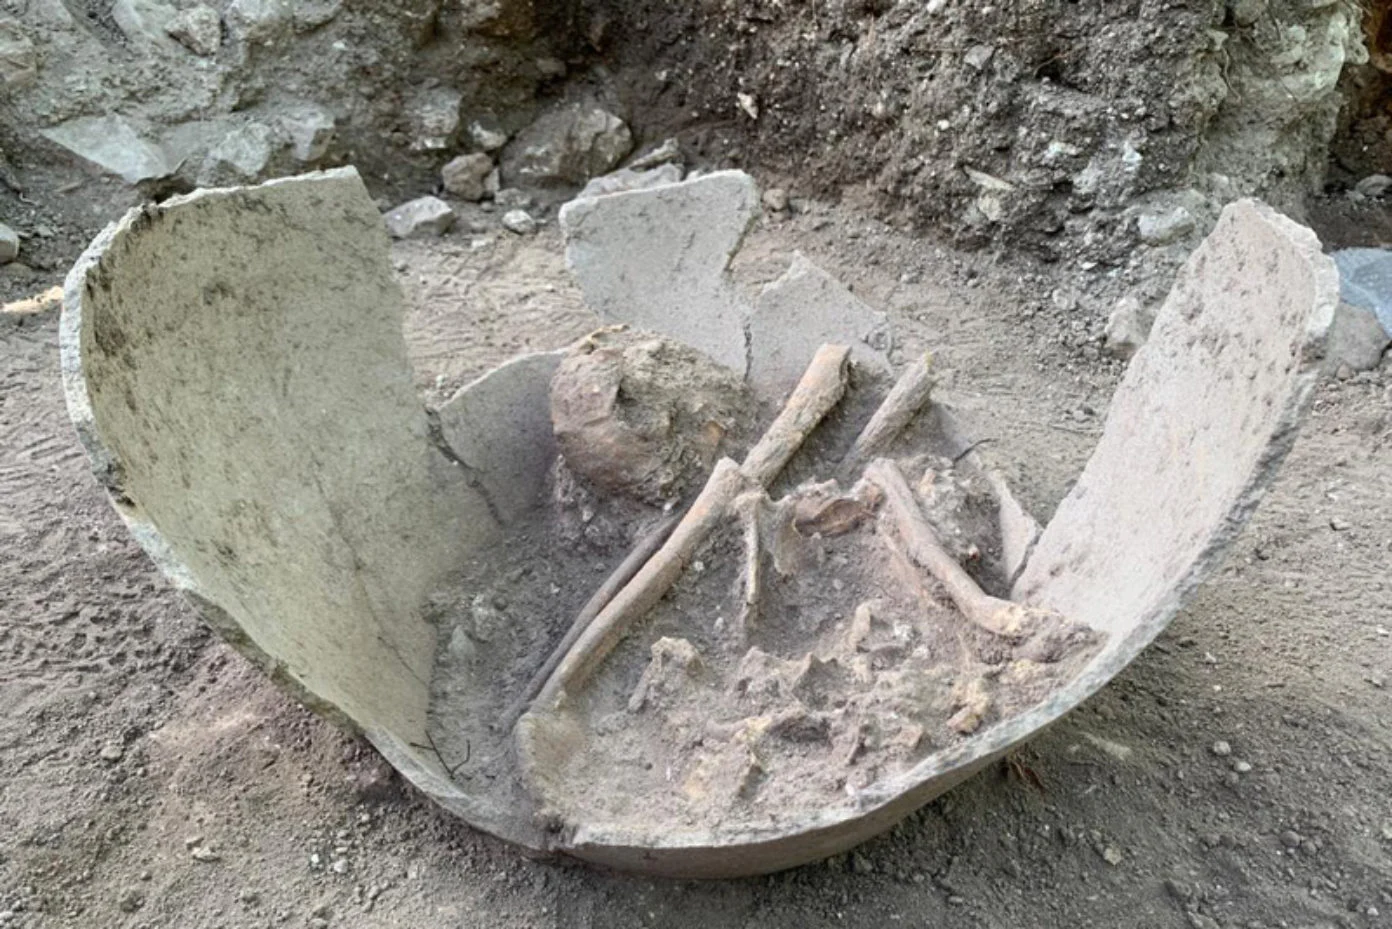 Archaeologists have uncovered a Maya sacrificial victim with a Jade ring in El Tigre, Mexico.